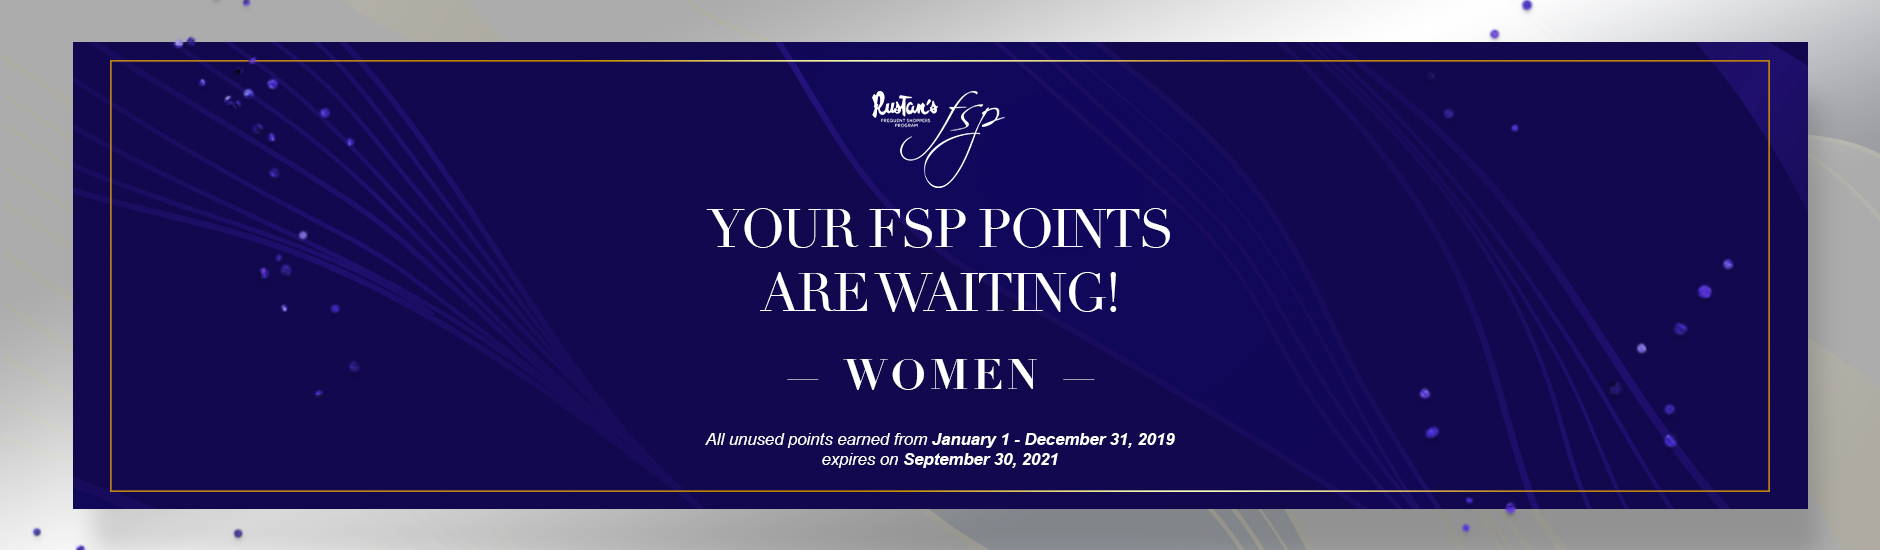 Your FSP Points are Waiting this September: Women